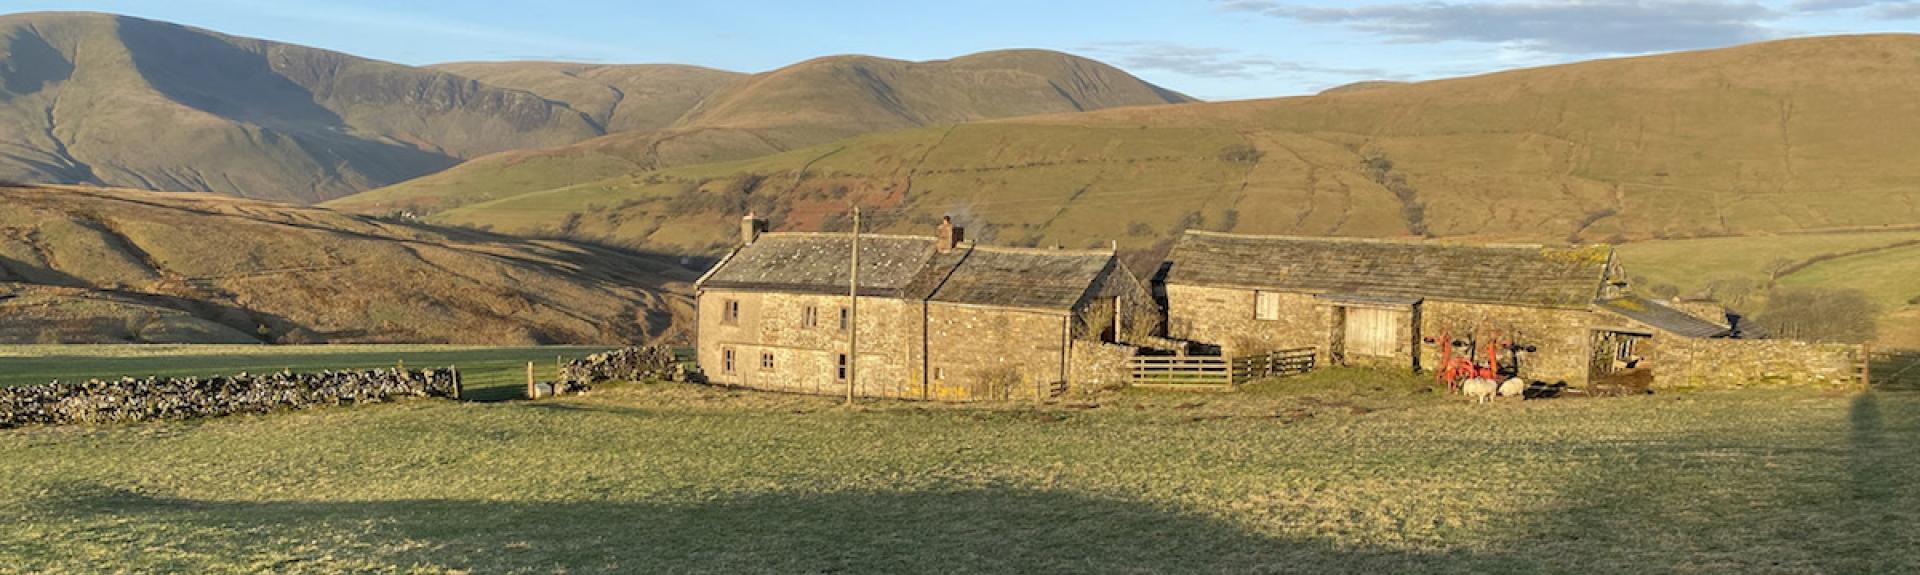 A stone-built Cumbrian farmhouse and attached barns in a remote moorland location